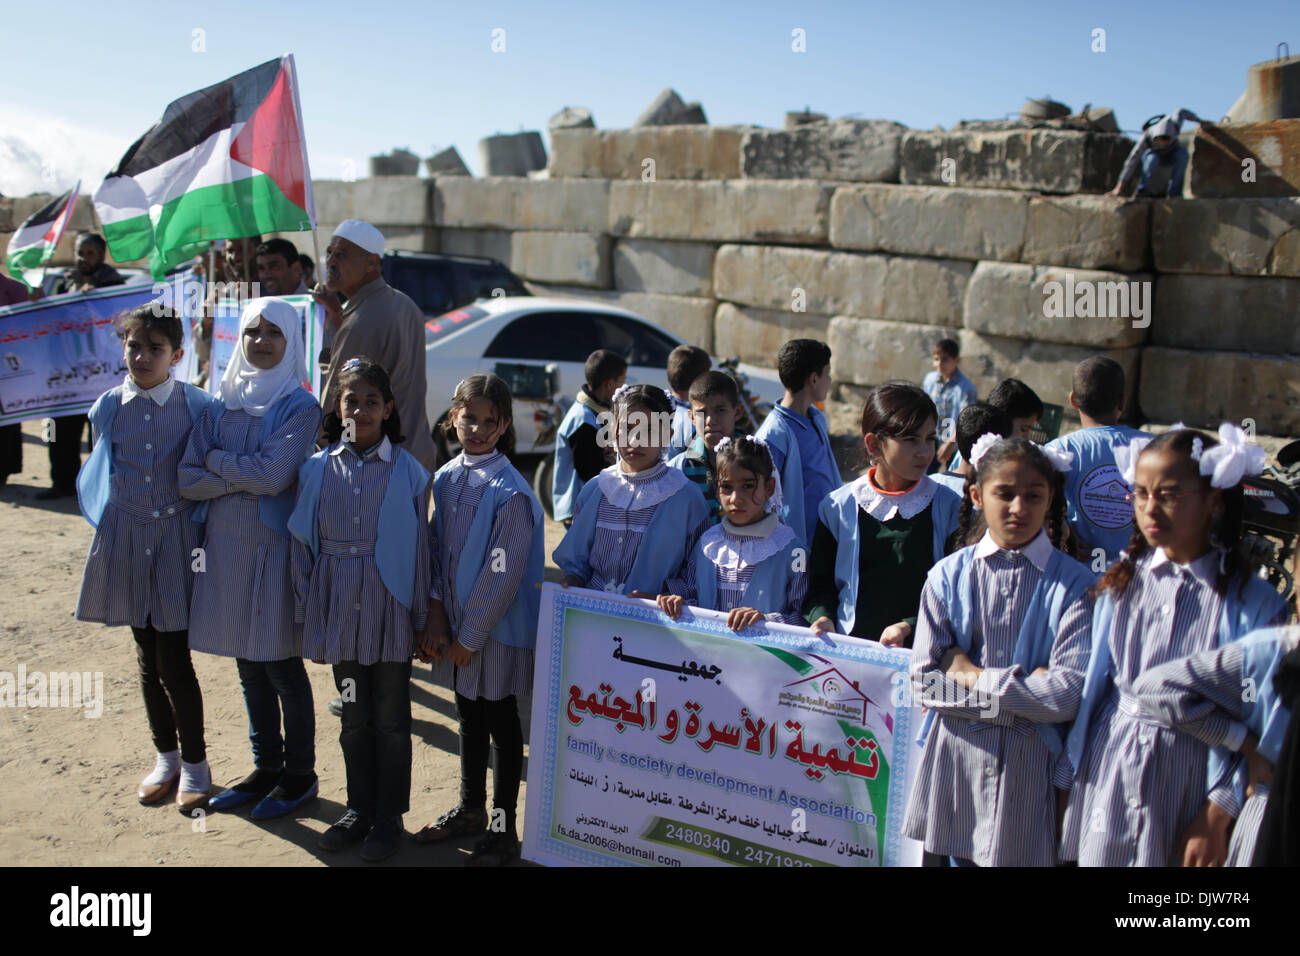 (131130) -- GAZA, Nov. 30, 2013 (Xinhua)  -- Palestinian children hold banners and Palestinian national flags during a protest against Israel's maritime blockade on the Gaza Strip at a port in Gaza City, Nov. 30, 2013. (Xinhua/Wissam Nassar) Stock Photo